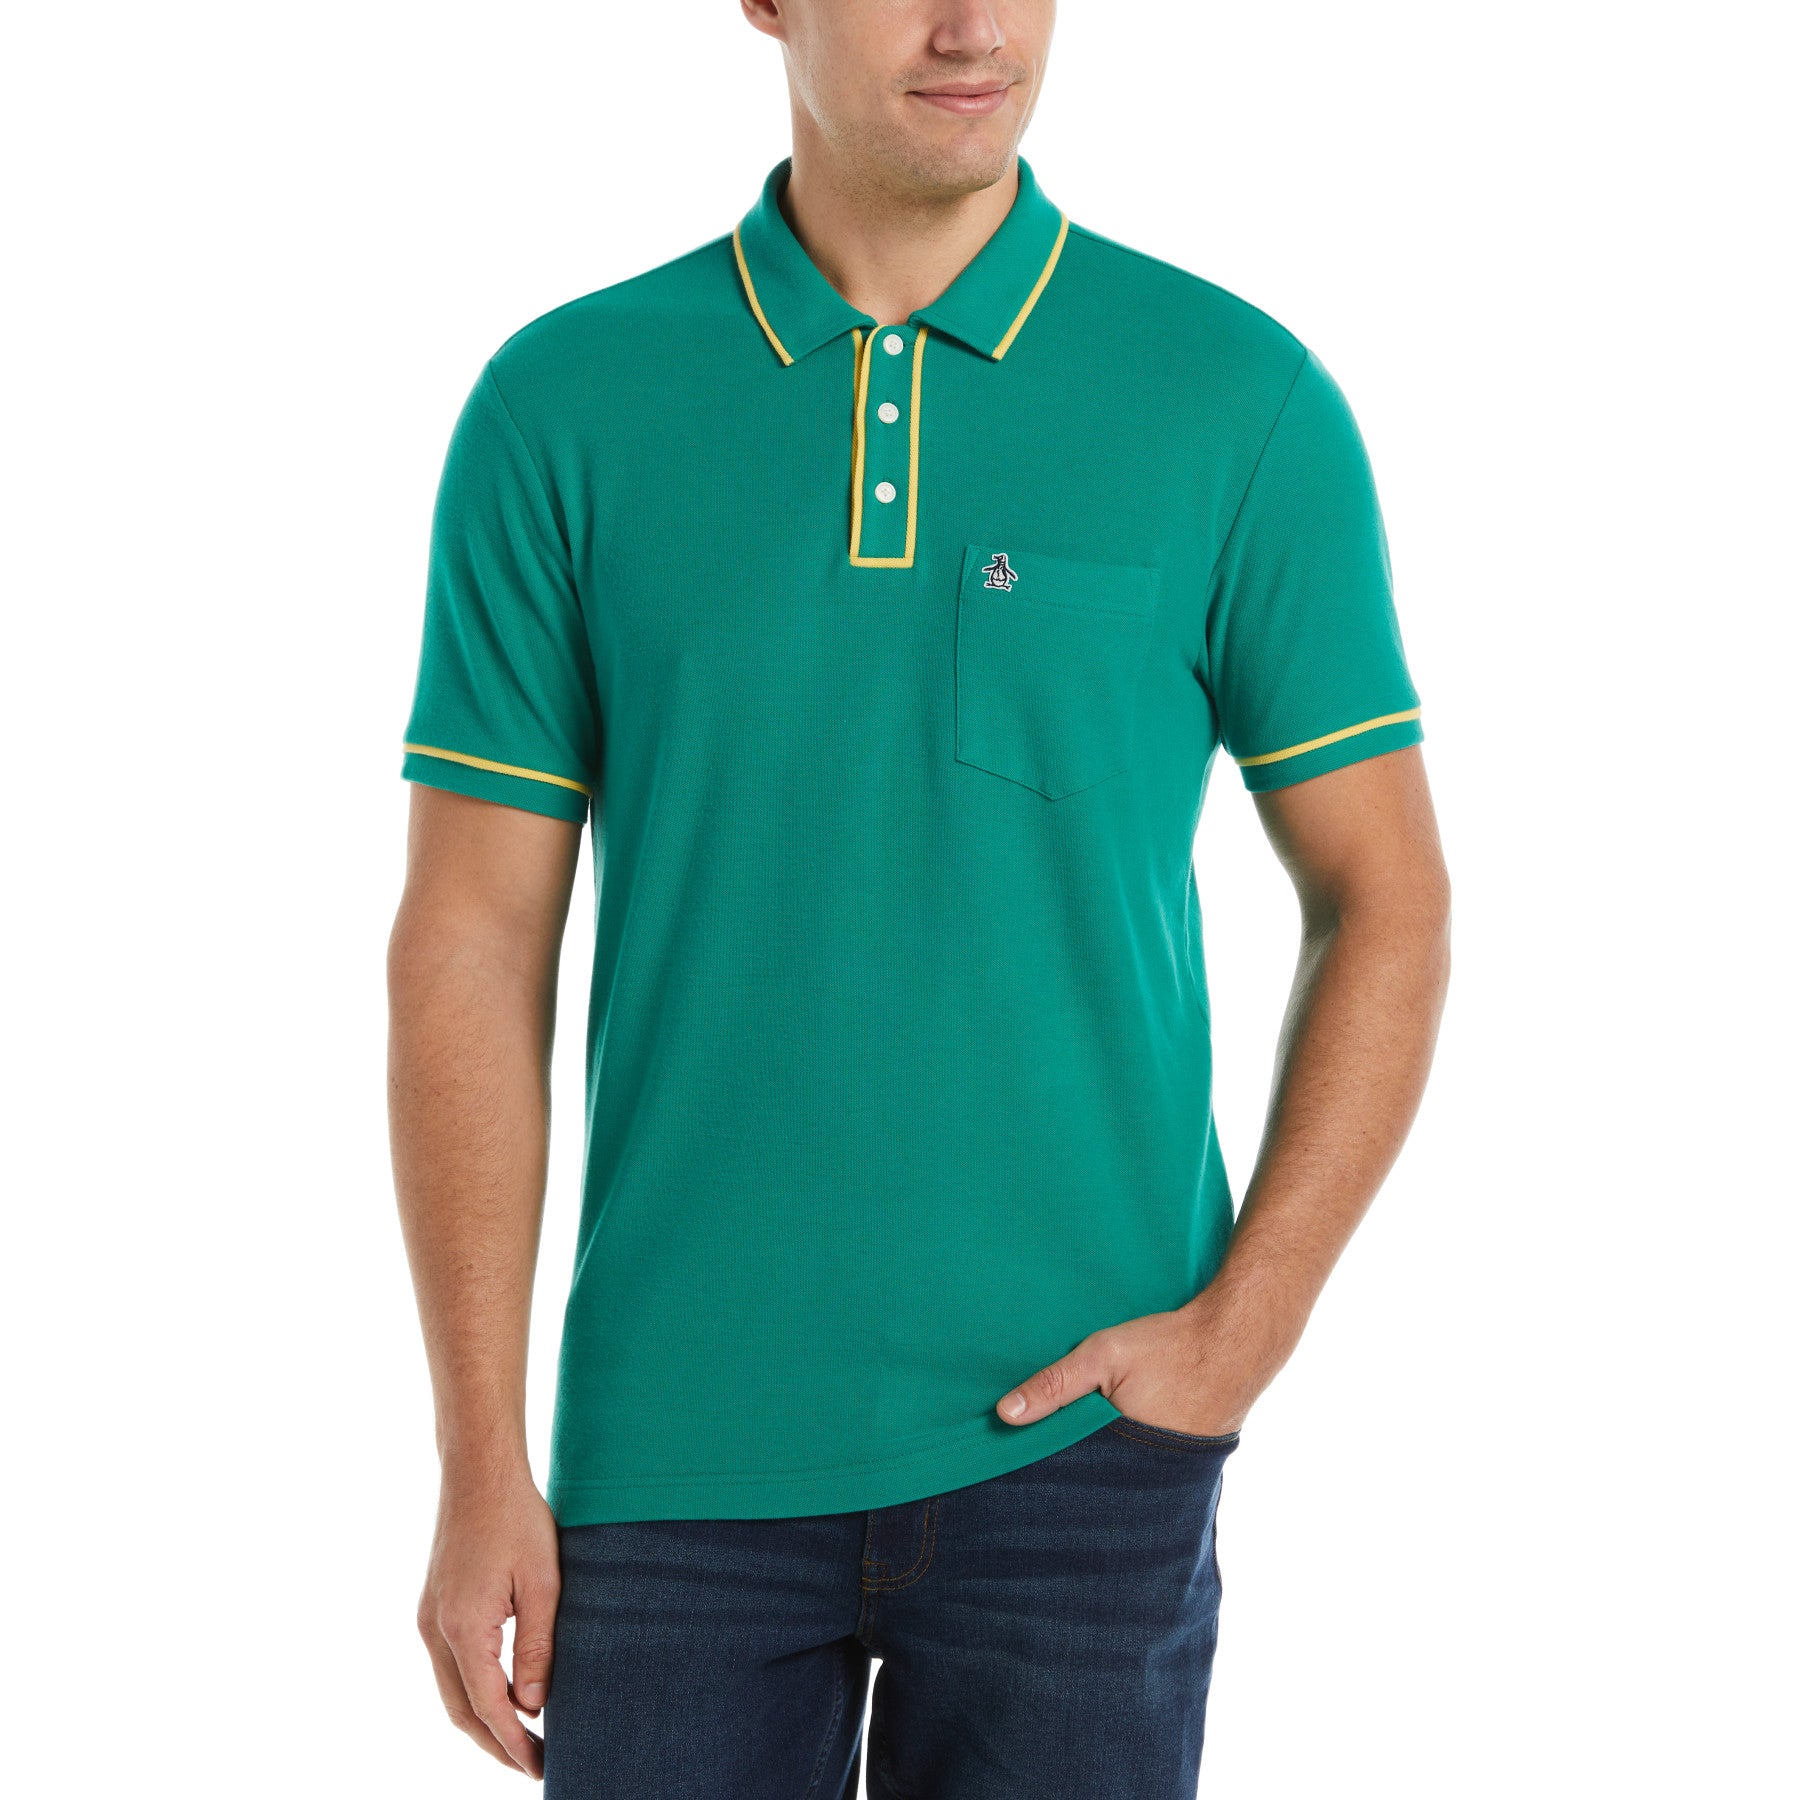 View Earl Organic Cotton Polo Shirt In Shady Glade information